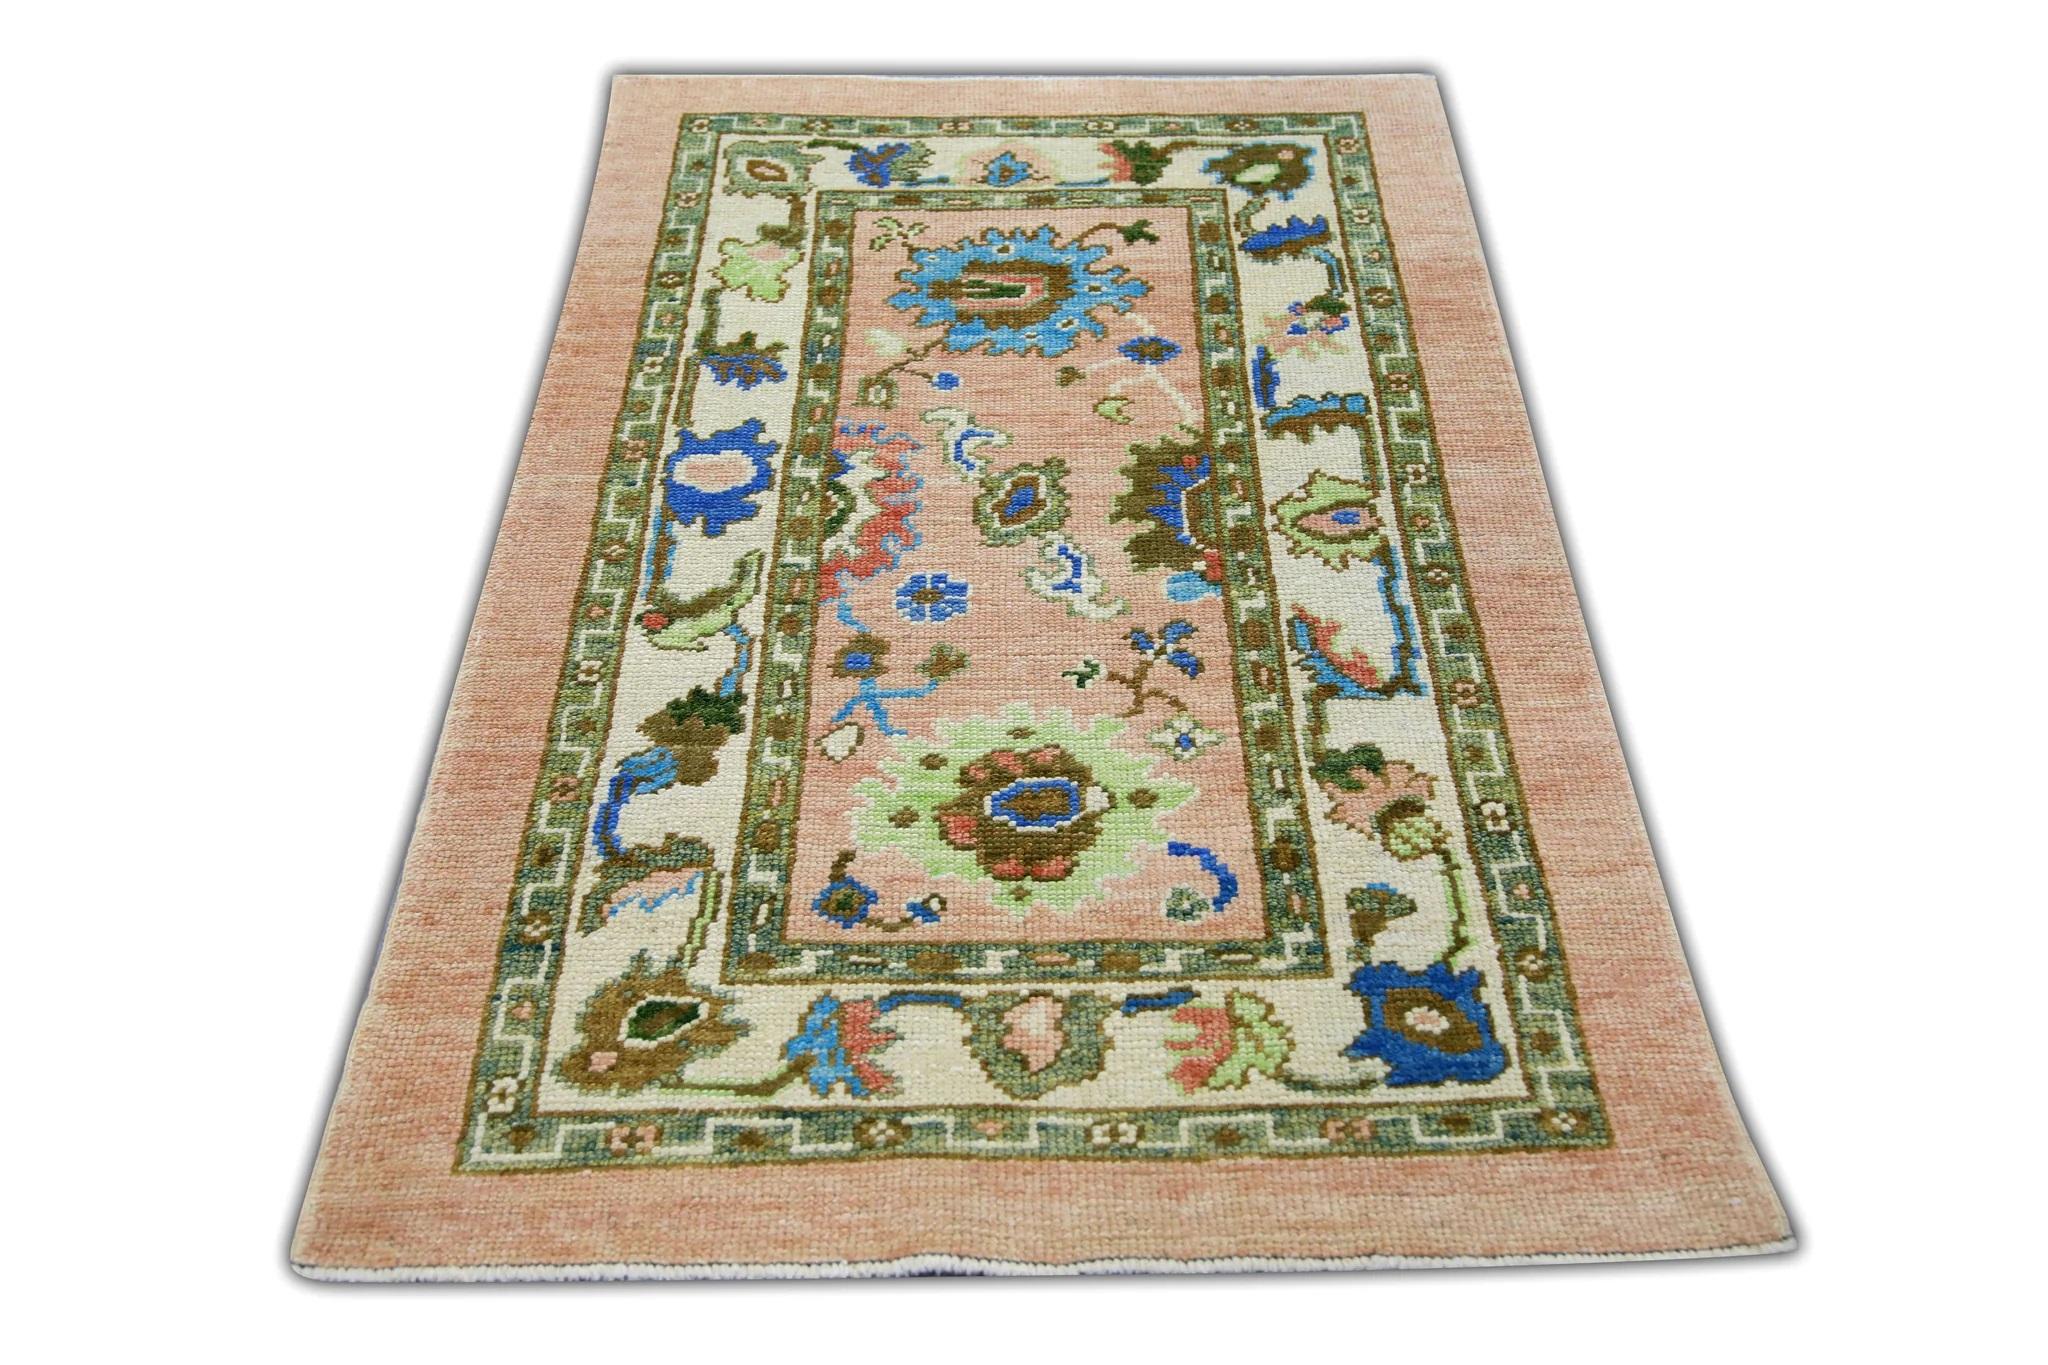 Contemporary Floral Handwoven Turkish Oushak Rug in Coral, Green, Brown, and Blue 3' x 5'1